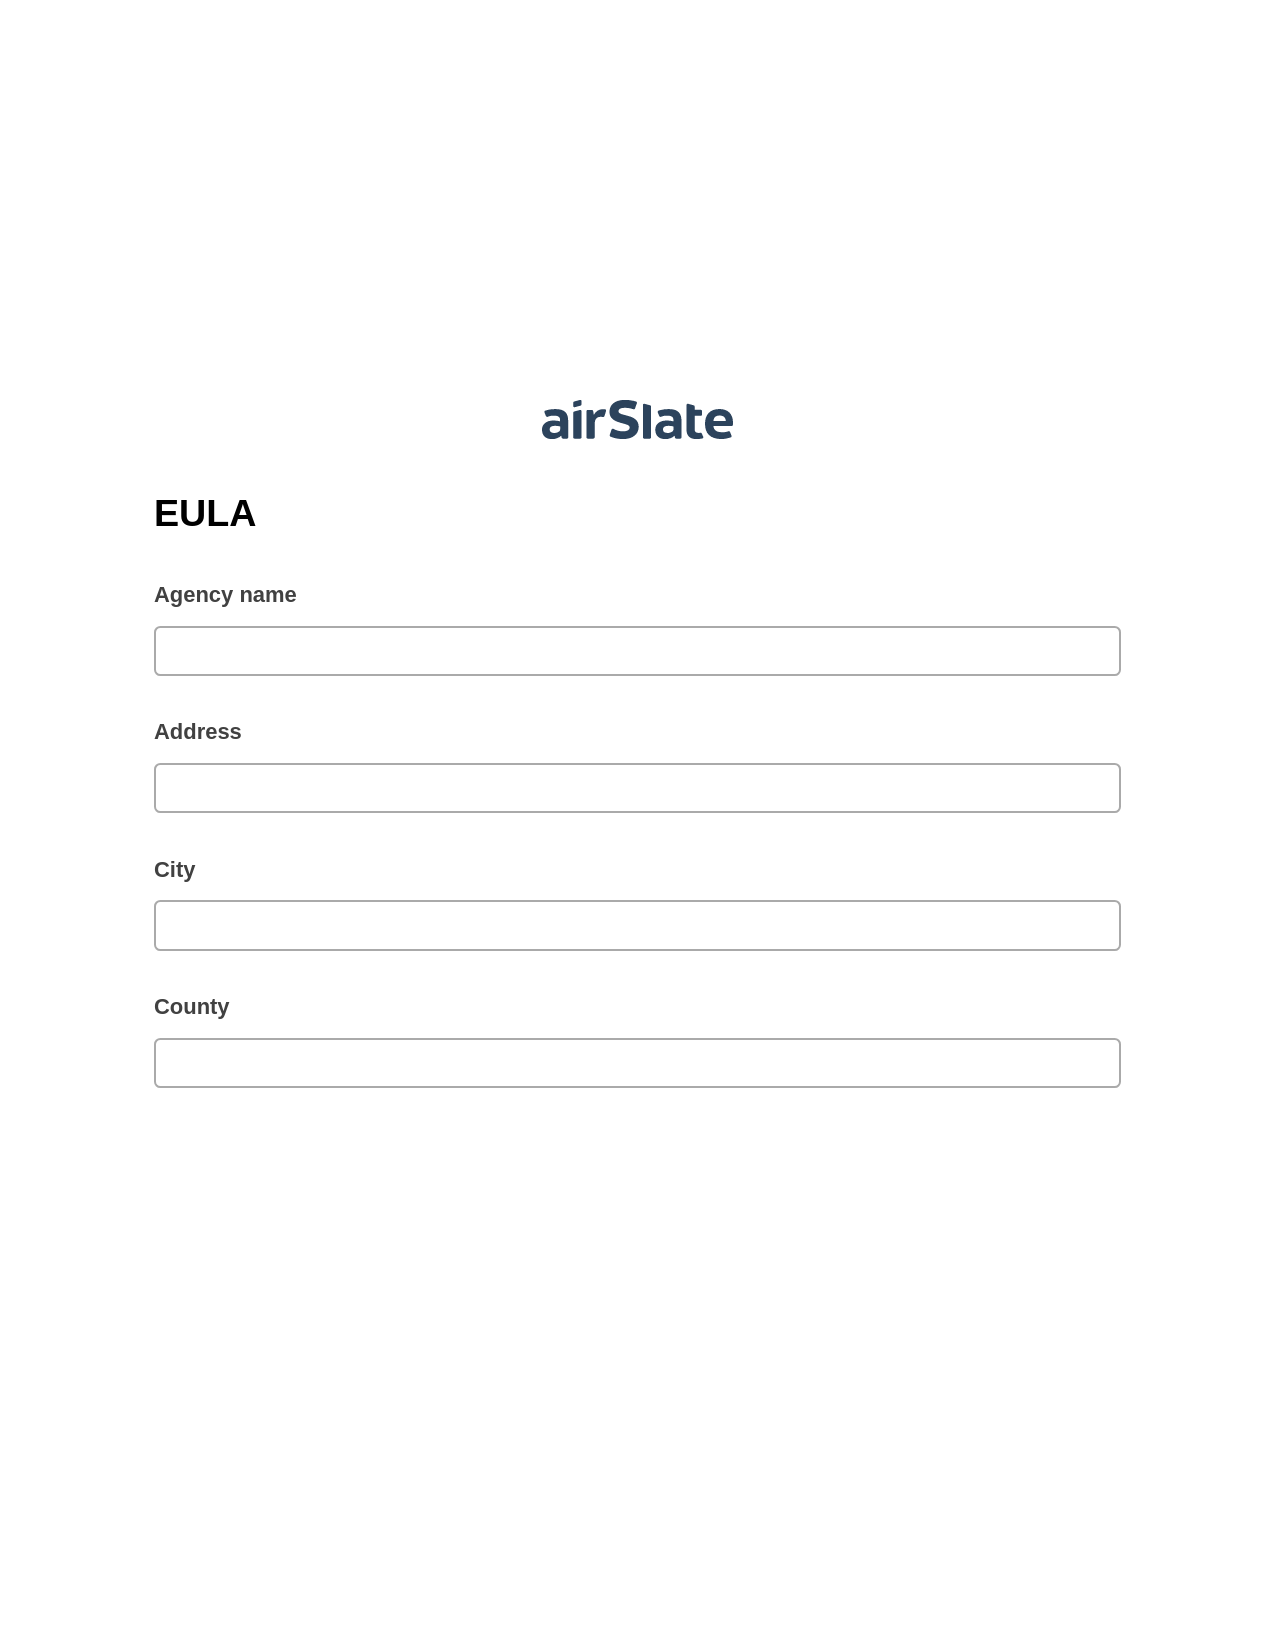 EULA Pre-fill Slate from MS Dynamics 365 Records Bot, In-person Signing Bot, Google Drive Bot